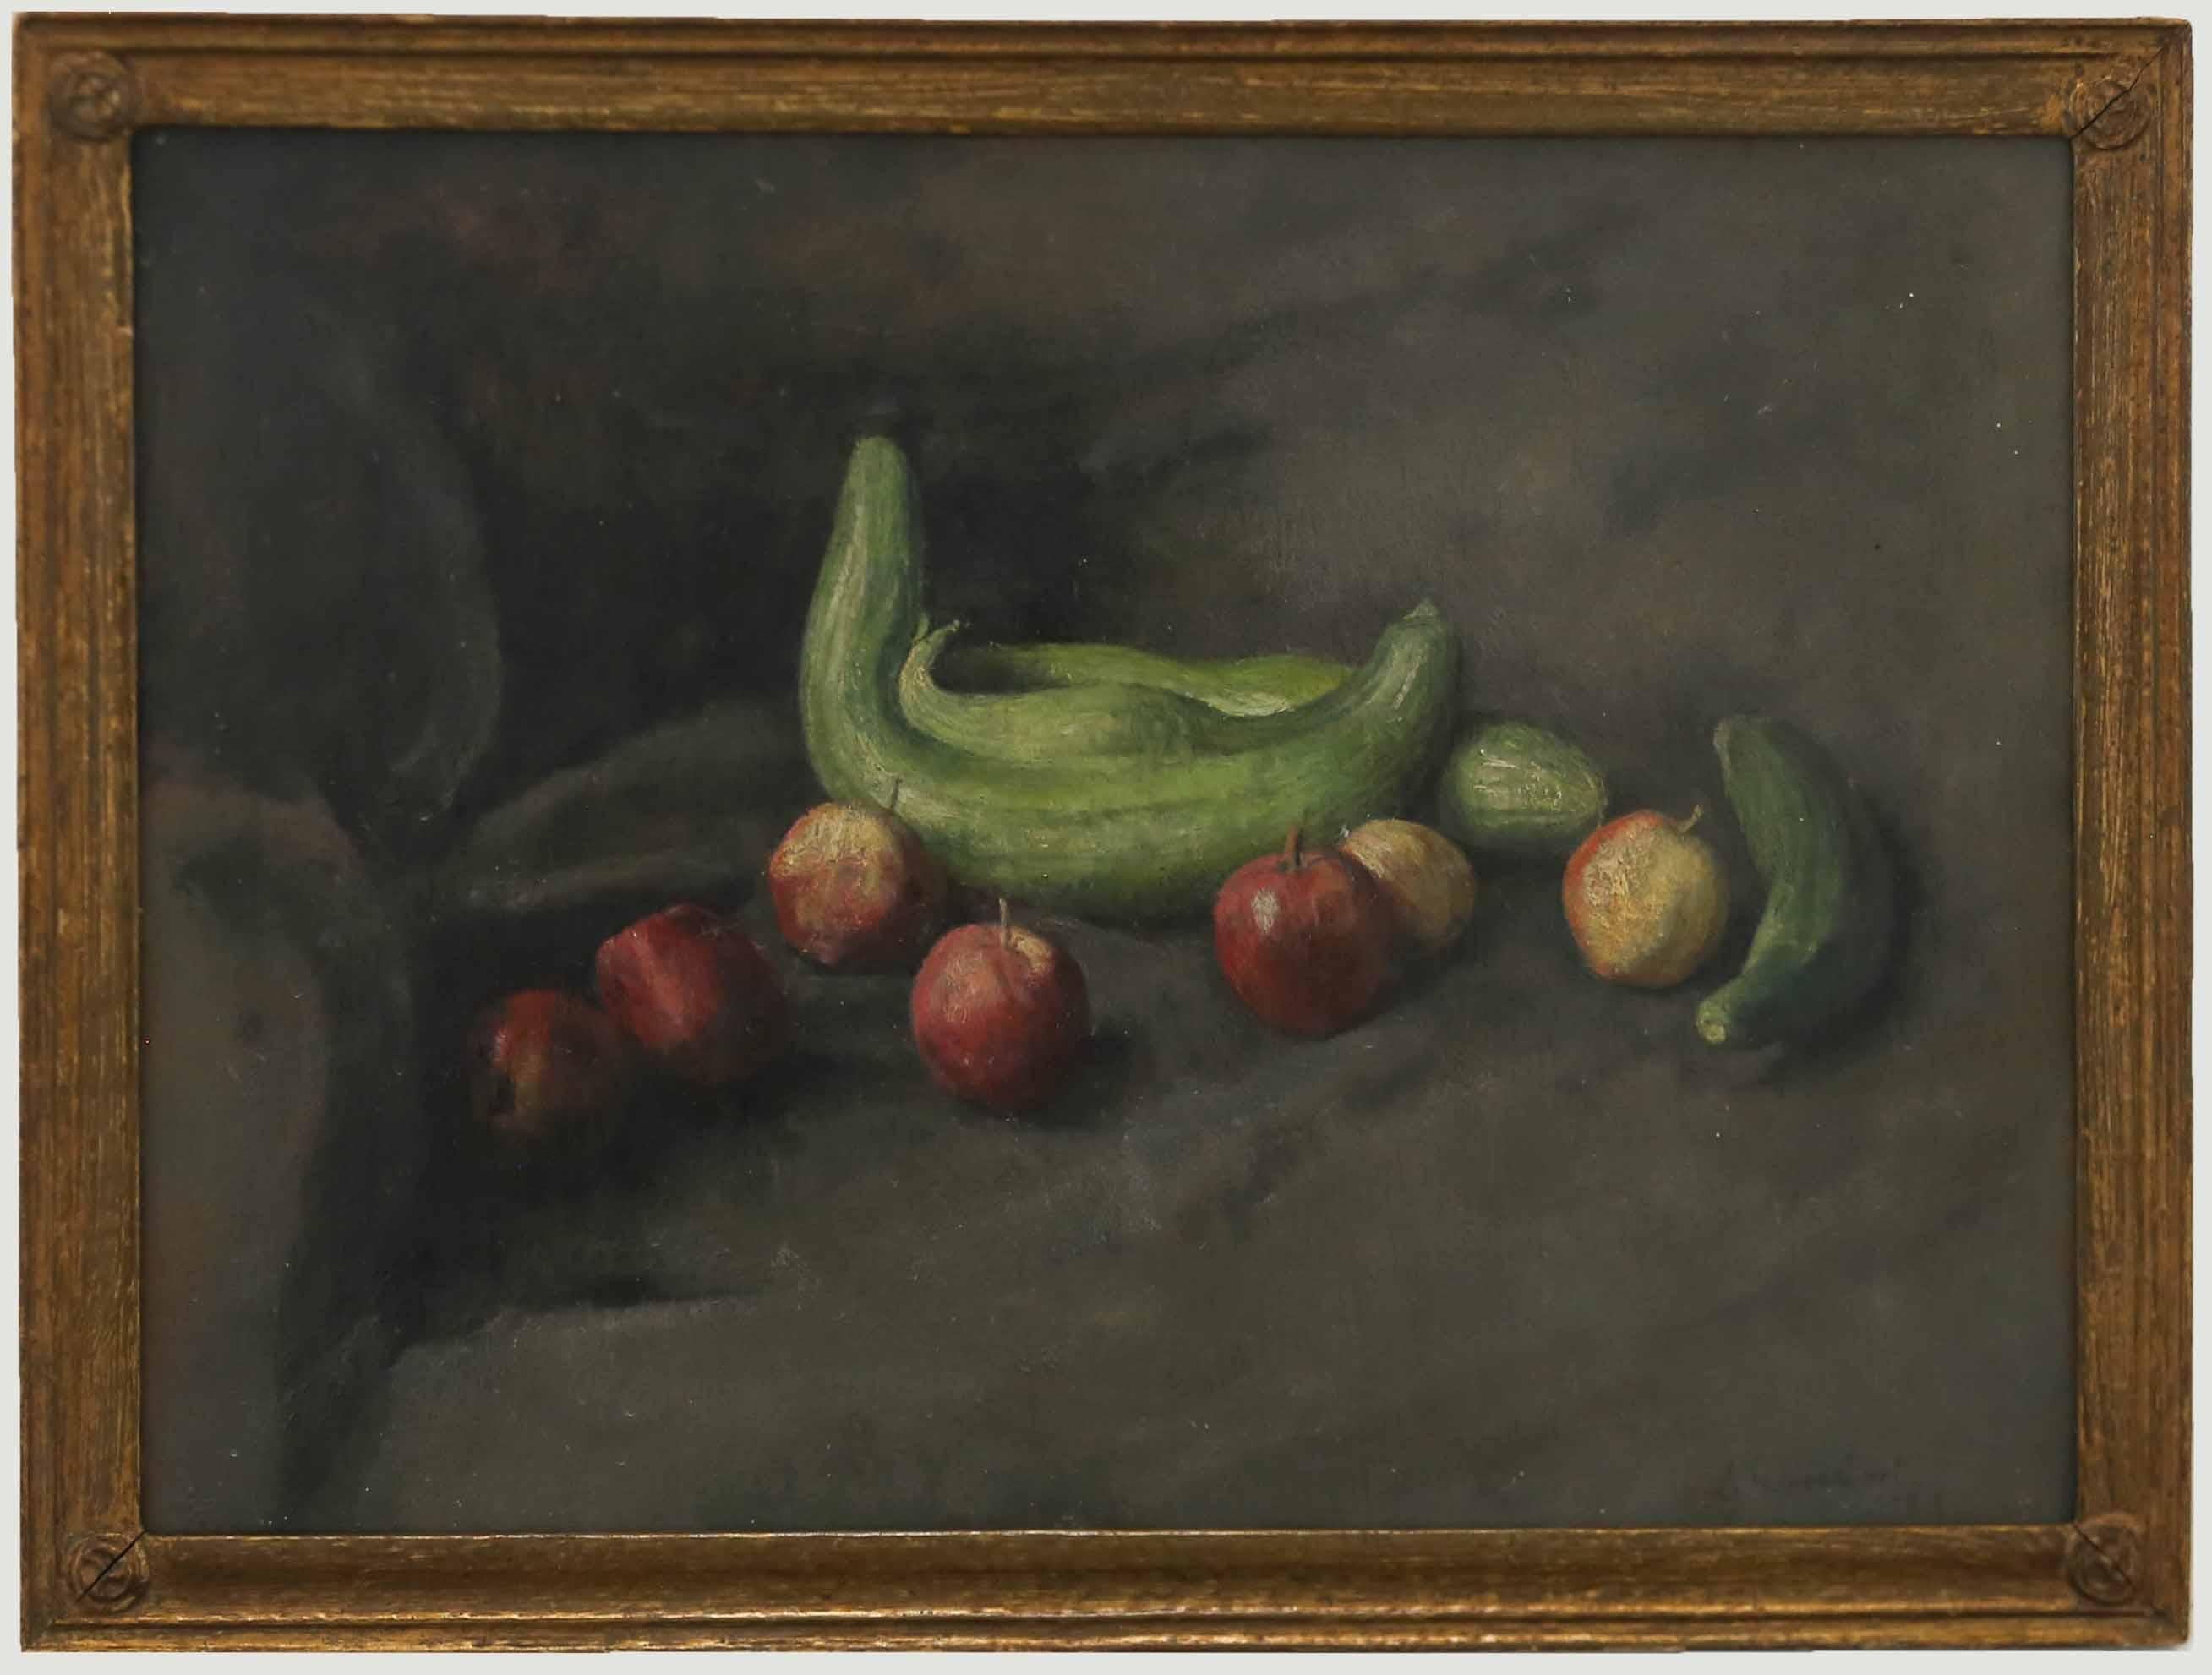 A fine 20th Century still life, executed with sensitivity and finesse. The painting shows an unusual double cucumber and an array of small apples strewn across grey drapery. The artist has used shadow and a darkened ground to add a moodiness to the